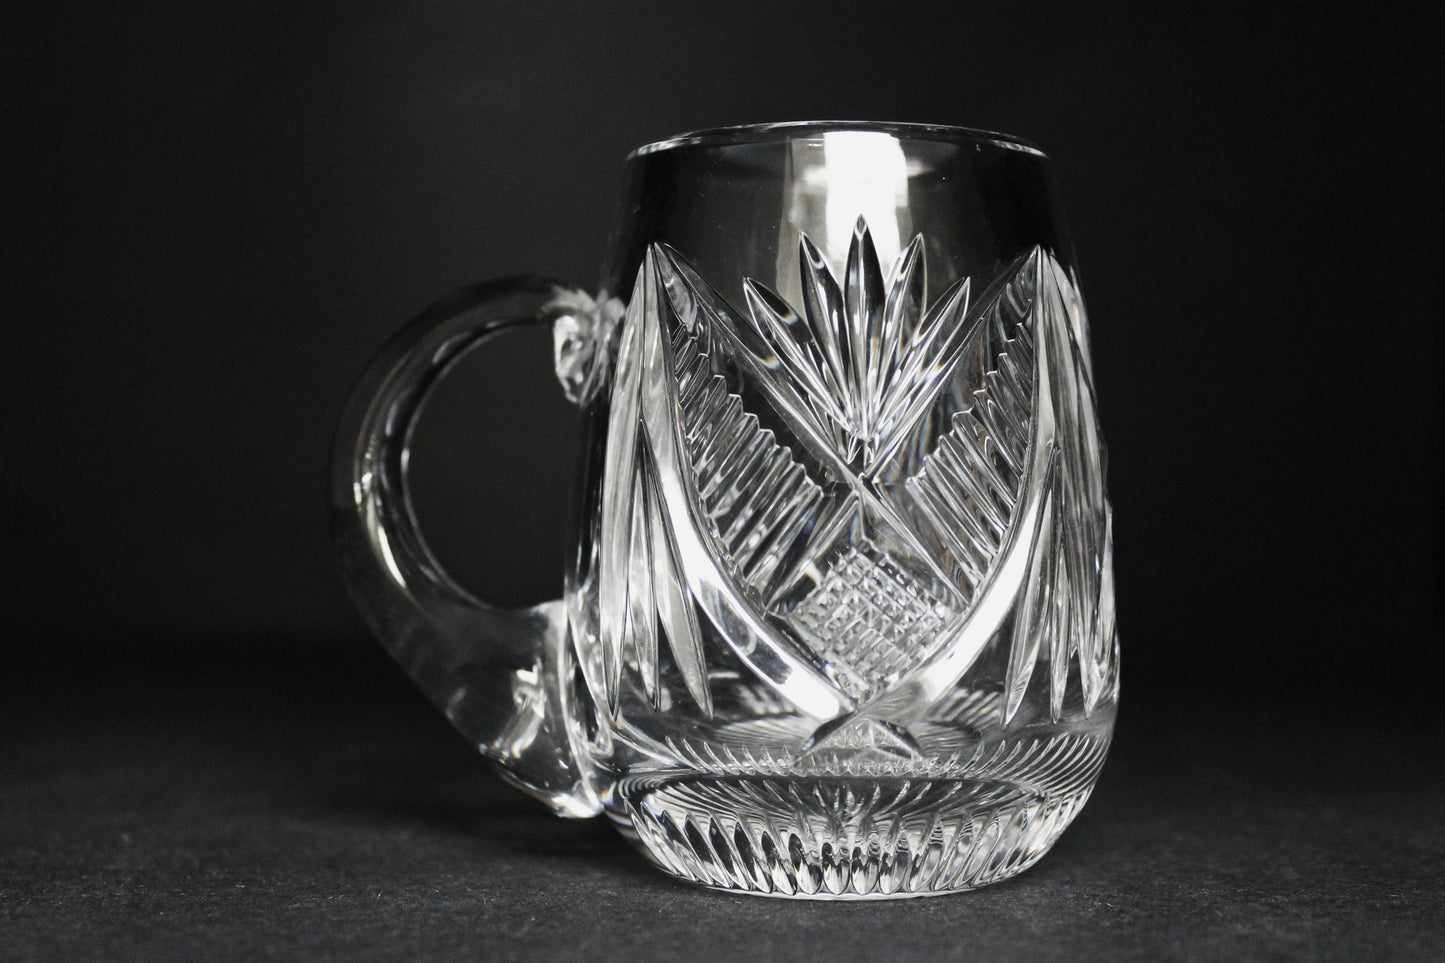 Hand Cut glass Baby's Mug can be customized - O'Rourke crystal awards & gifts abp cut glass